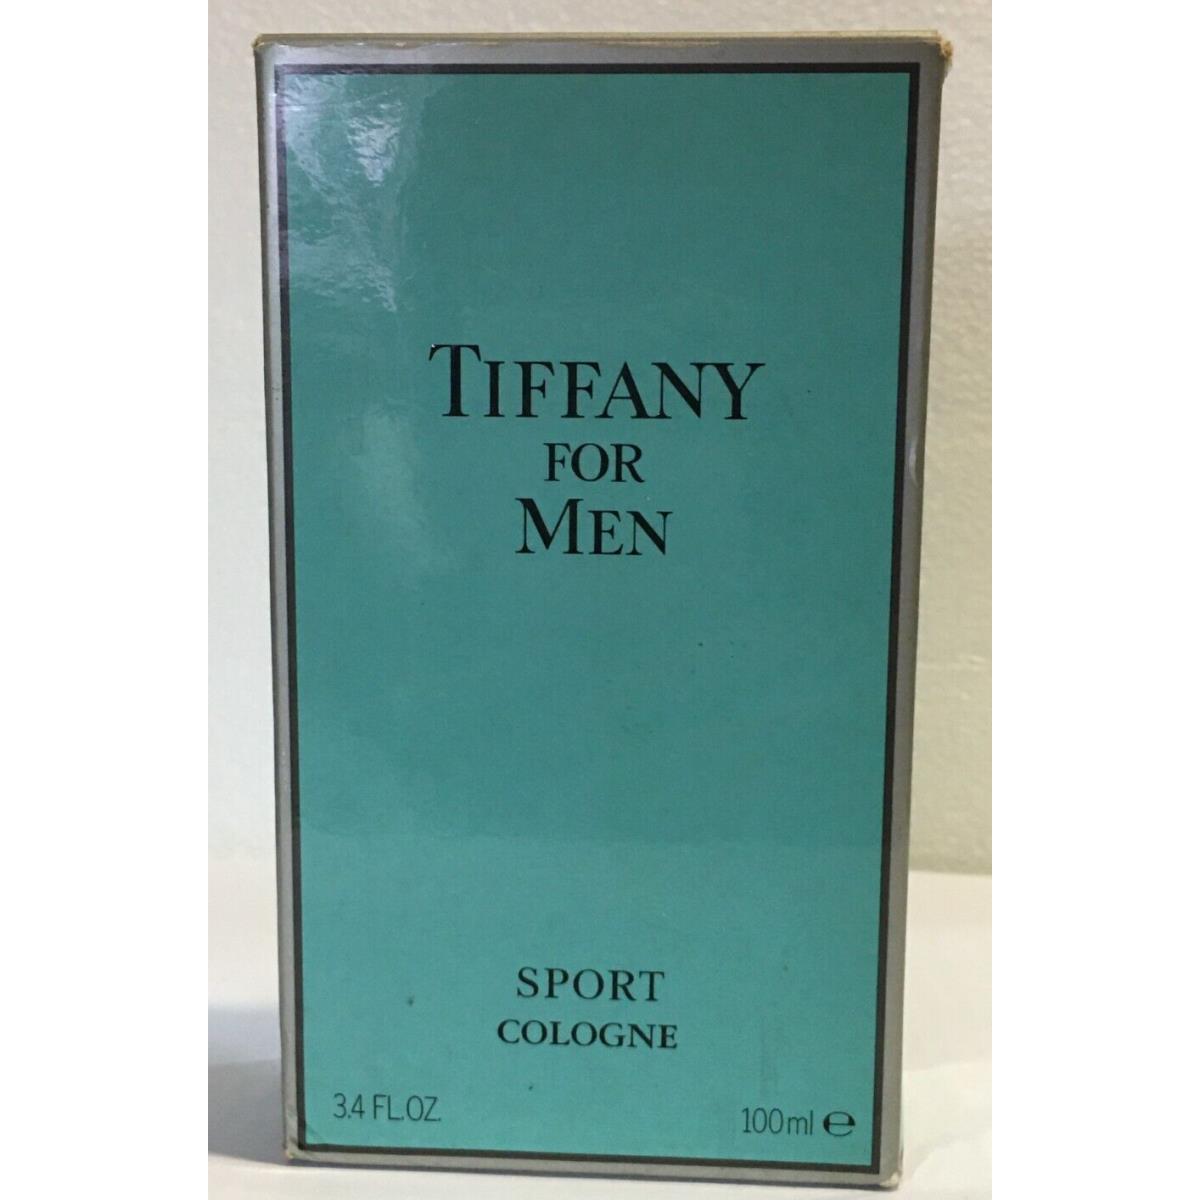 Tiffany For Men Sport Tiffany Cologne 100ml in Unsealed Box